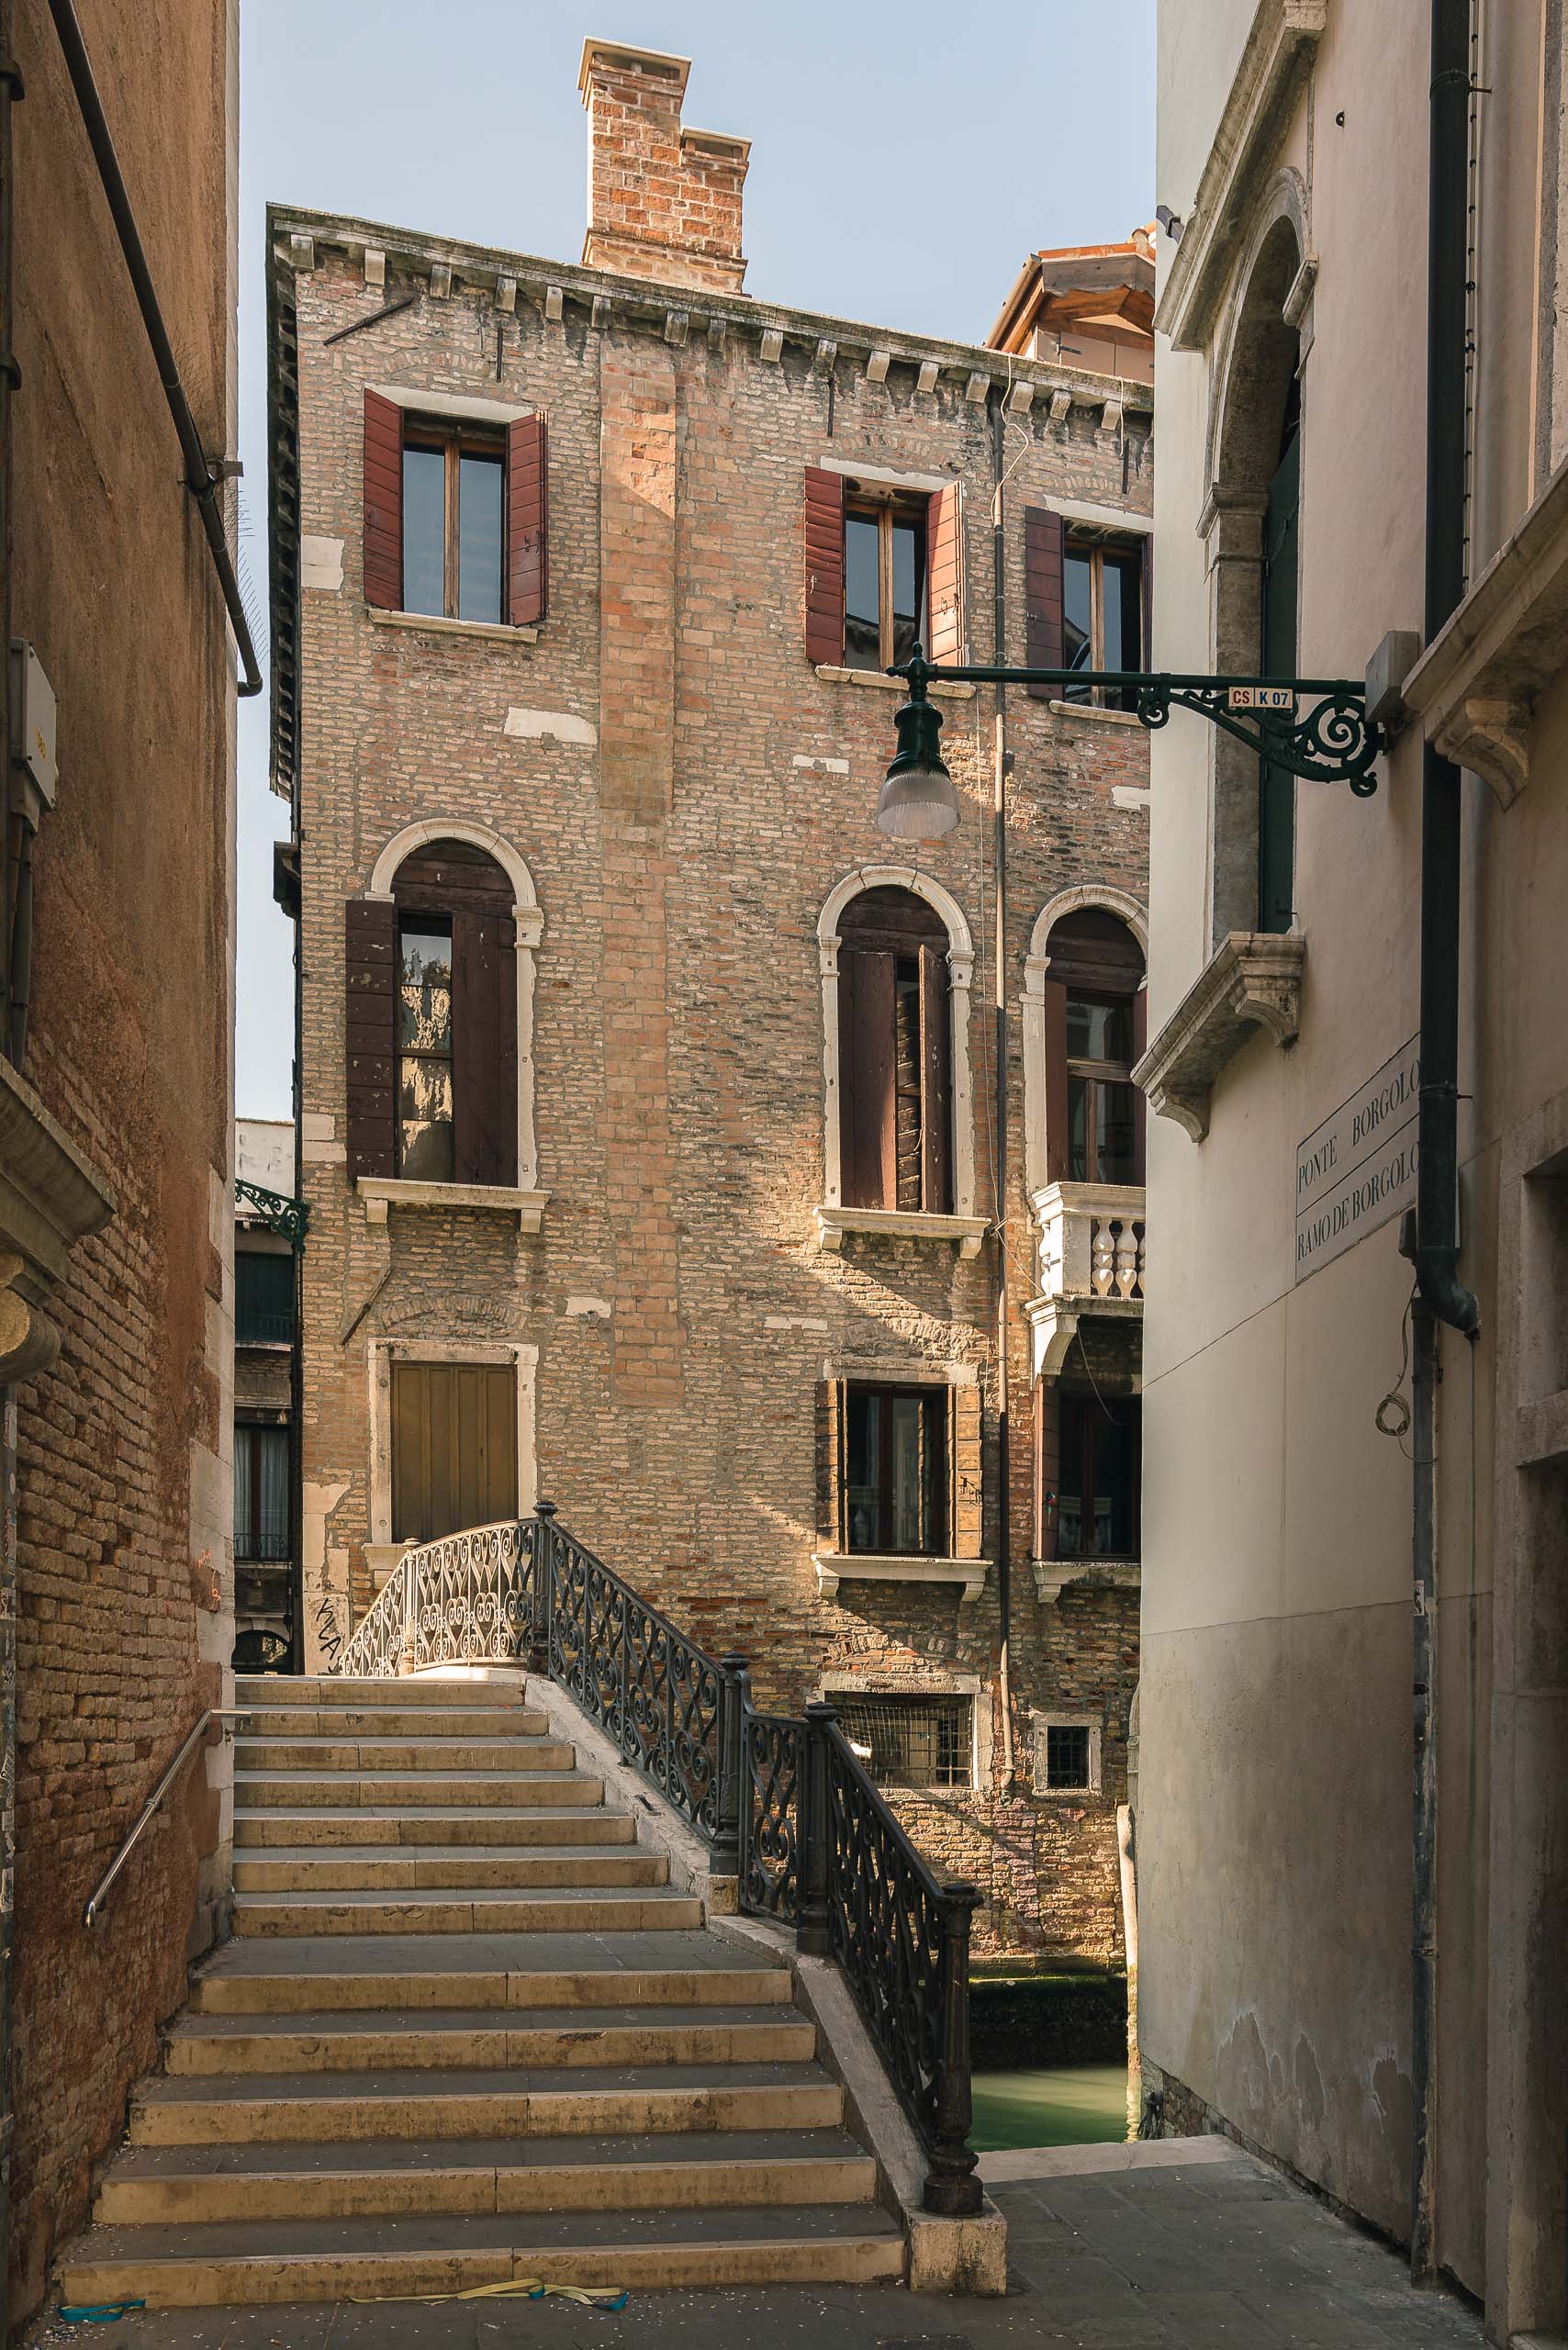 Travel and street photography of Venice Veneto Italy made by New York photographer Mary Catherine Messner (mcmessner).